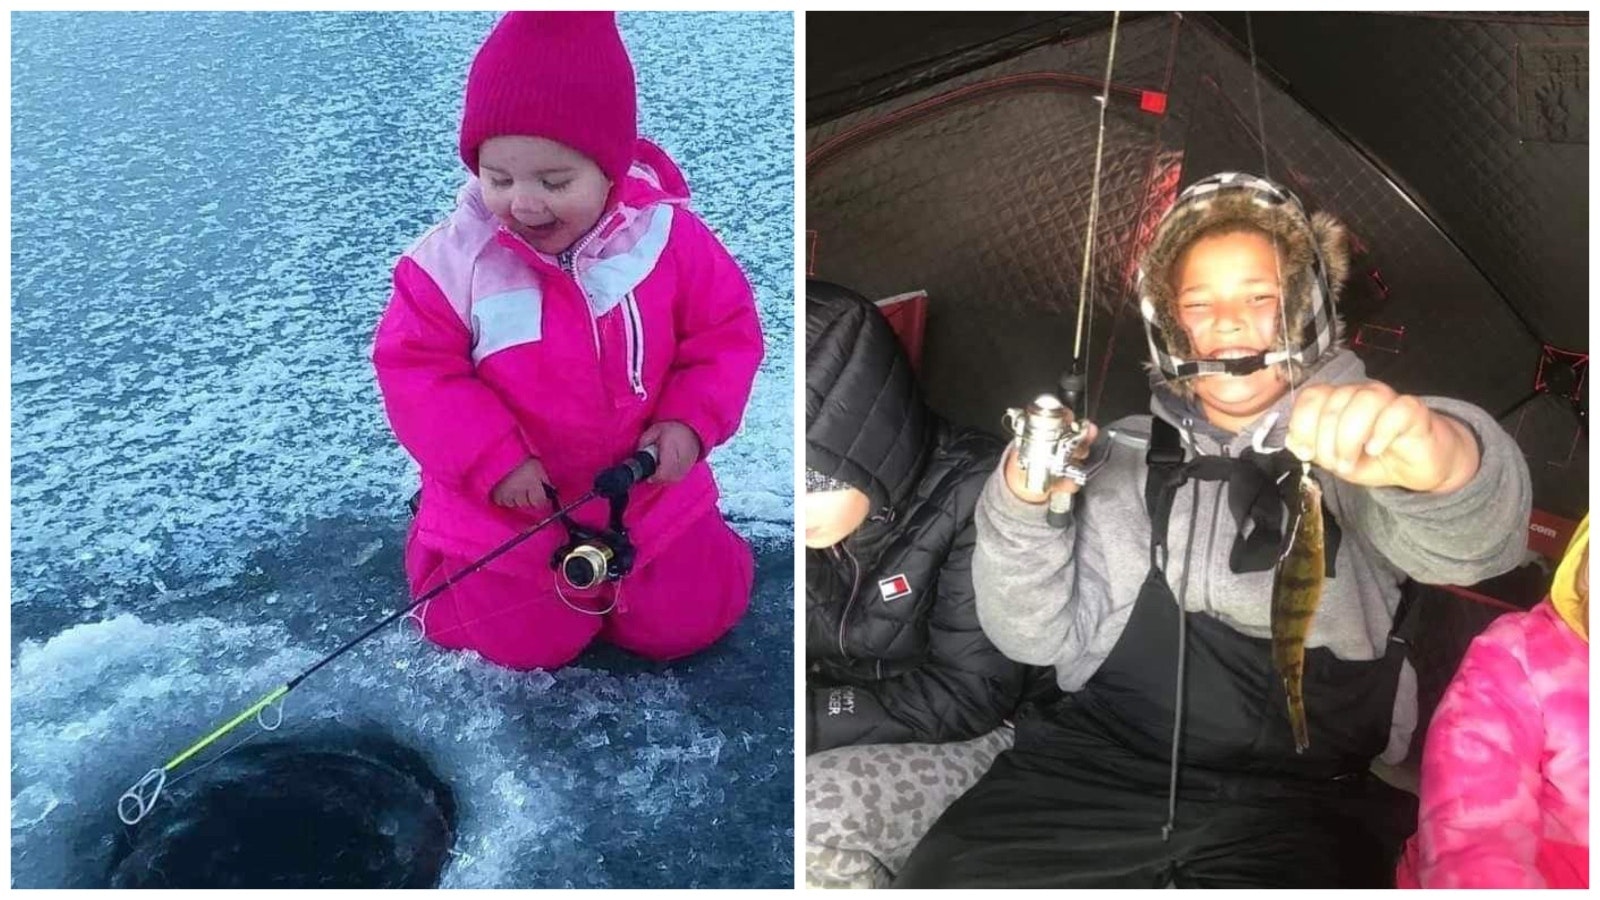 Ice fishing isn't too cold for some of Wyoming's tough kids.